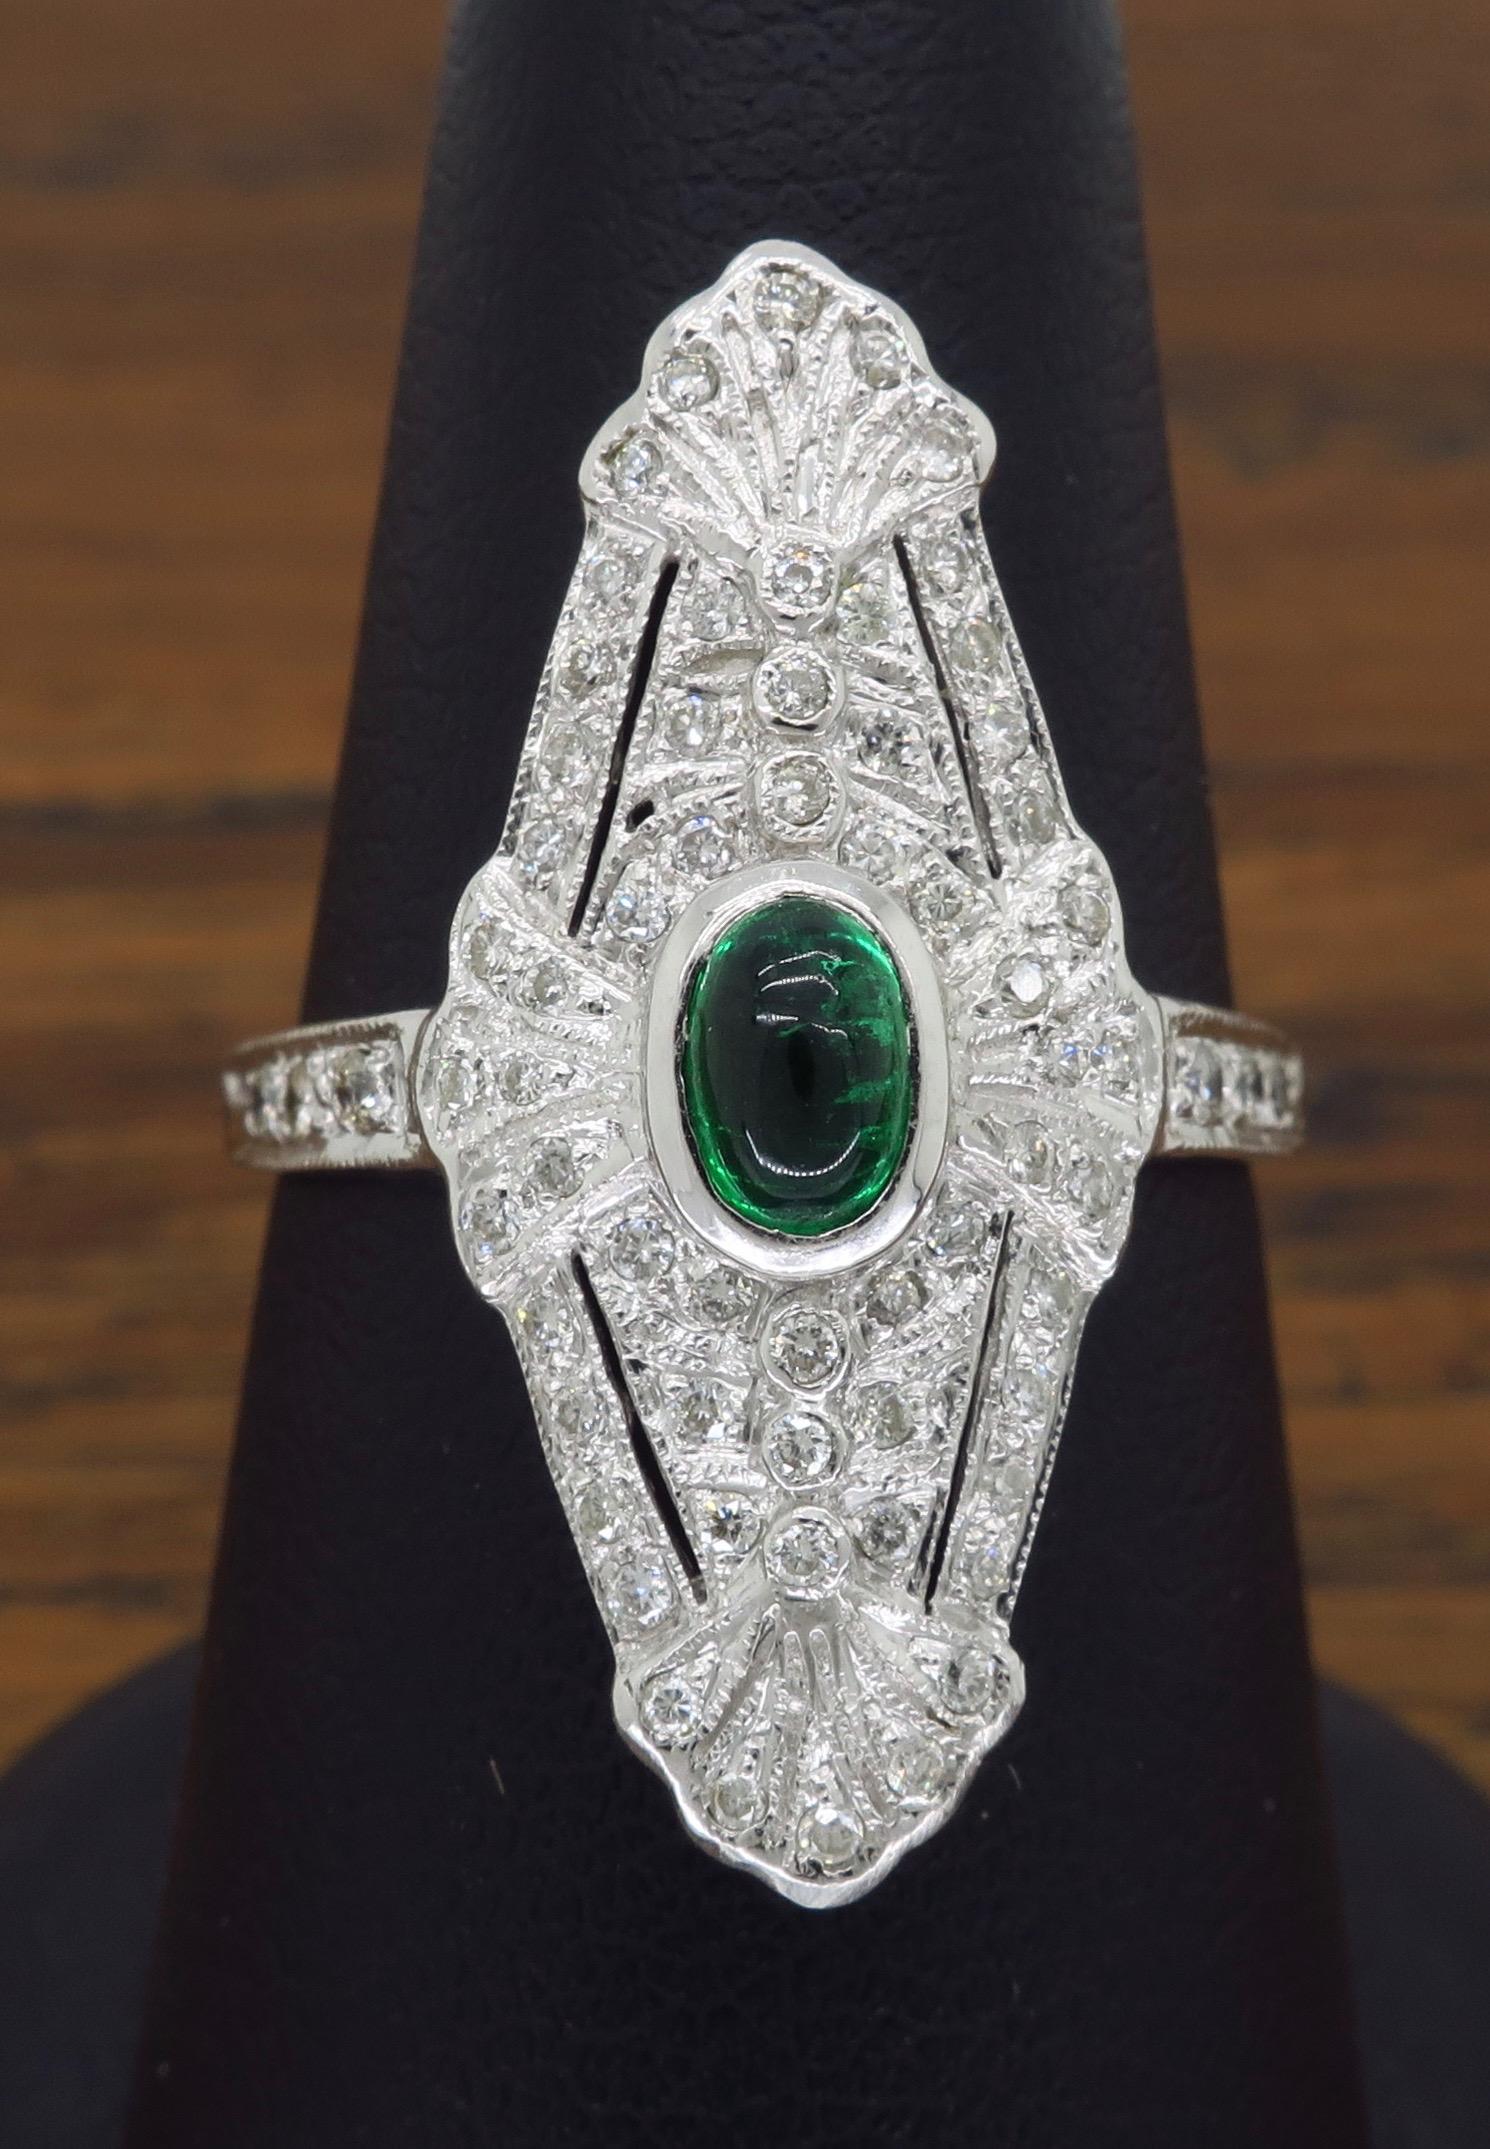 Absolutely stunning vintage navette emerald and diamond ring set in 18k white gold.

 
Gemstone: Emerald & Diamonds
Gemstone Carat Weight: Approximately .50CT
Diamond Carat Weight: Approximately .50CTW 
Diamond Cut: Round Brilliant
Color: Average